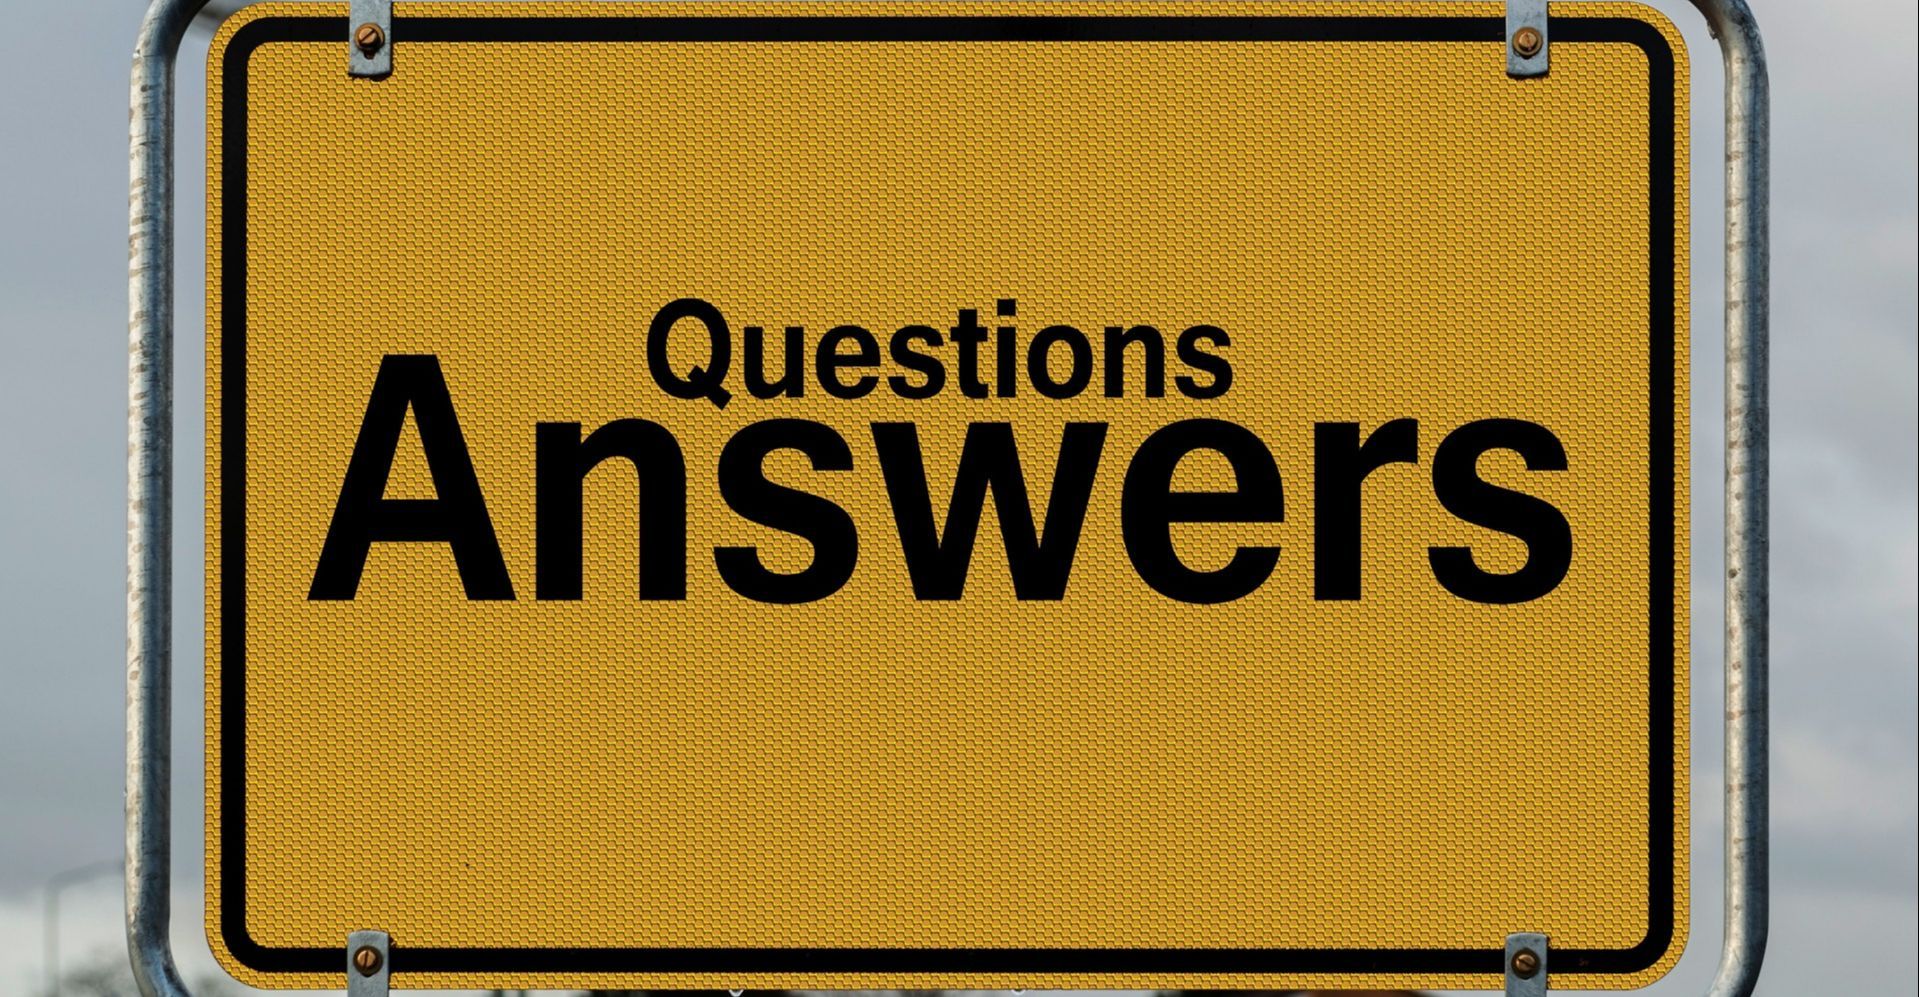 Questions Answers Signage